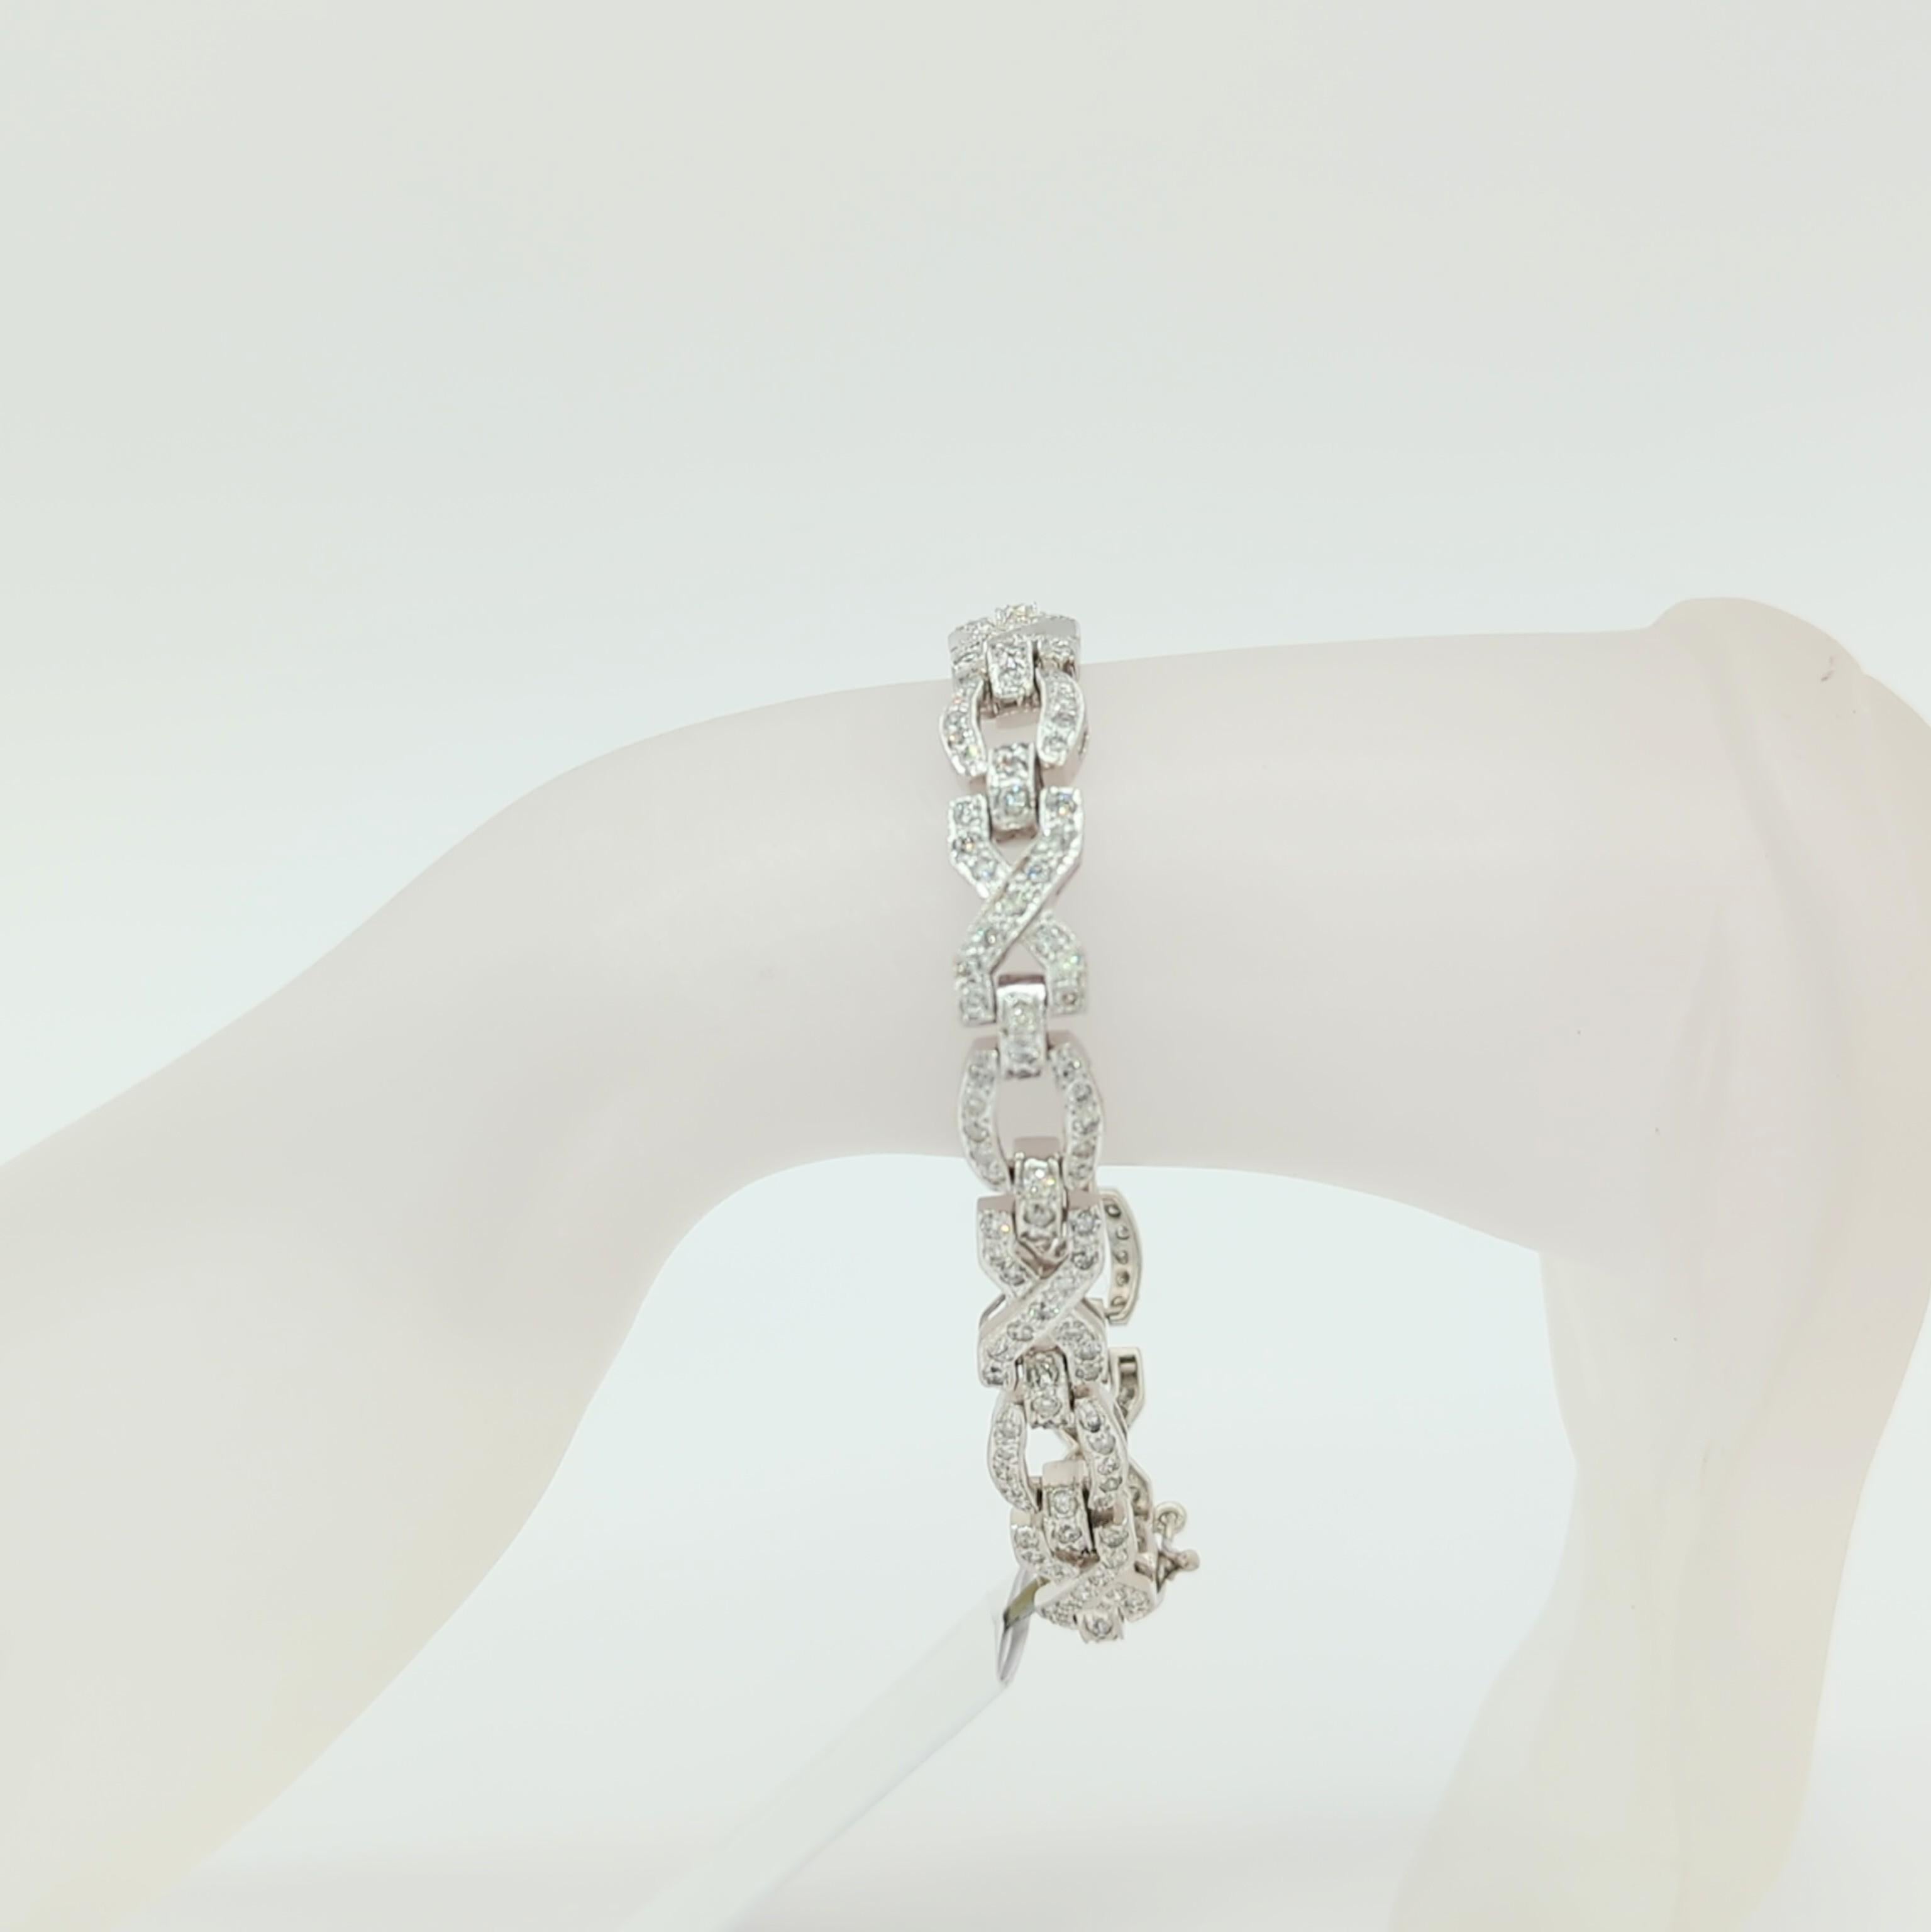 Beautiful bracelet with good quality, white, and bright diamond rounds.  Handmade in 14k white gold.  Length is 7.25